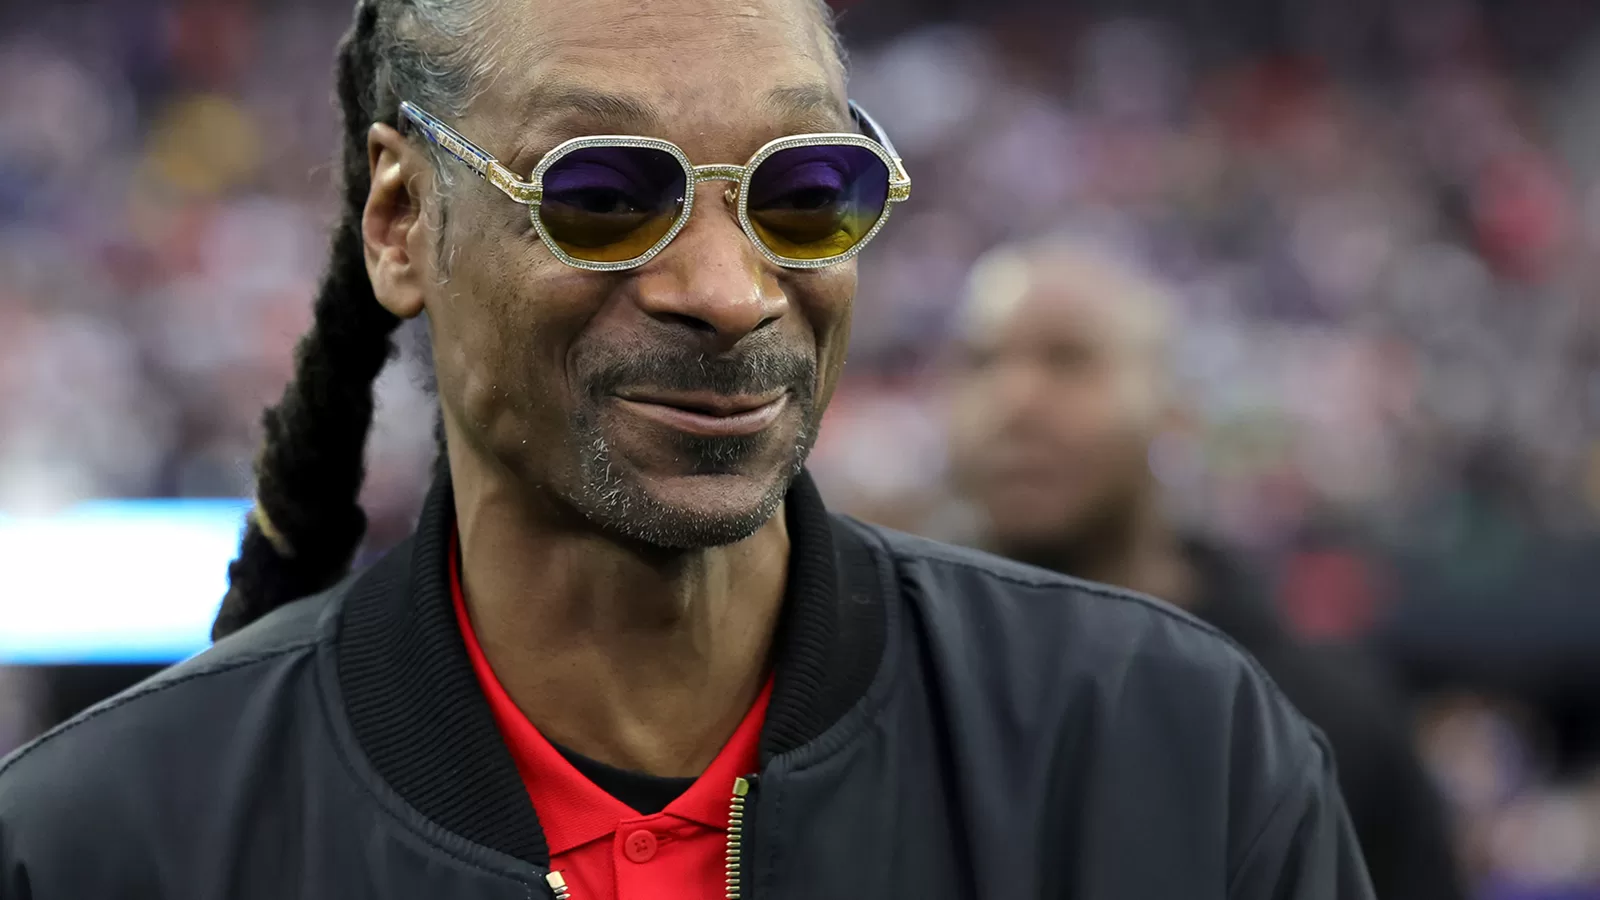 Snoop Dogg launches new coffee line inspired by Indonesia, INDOxyz